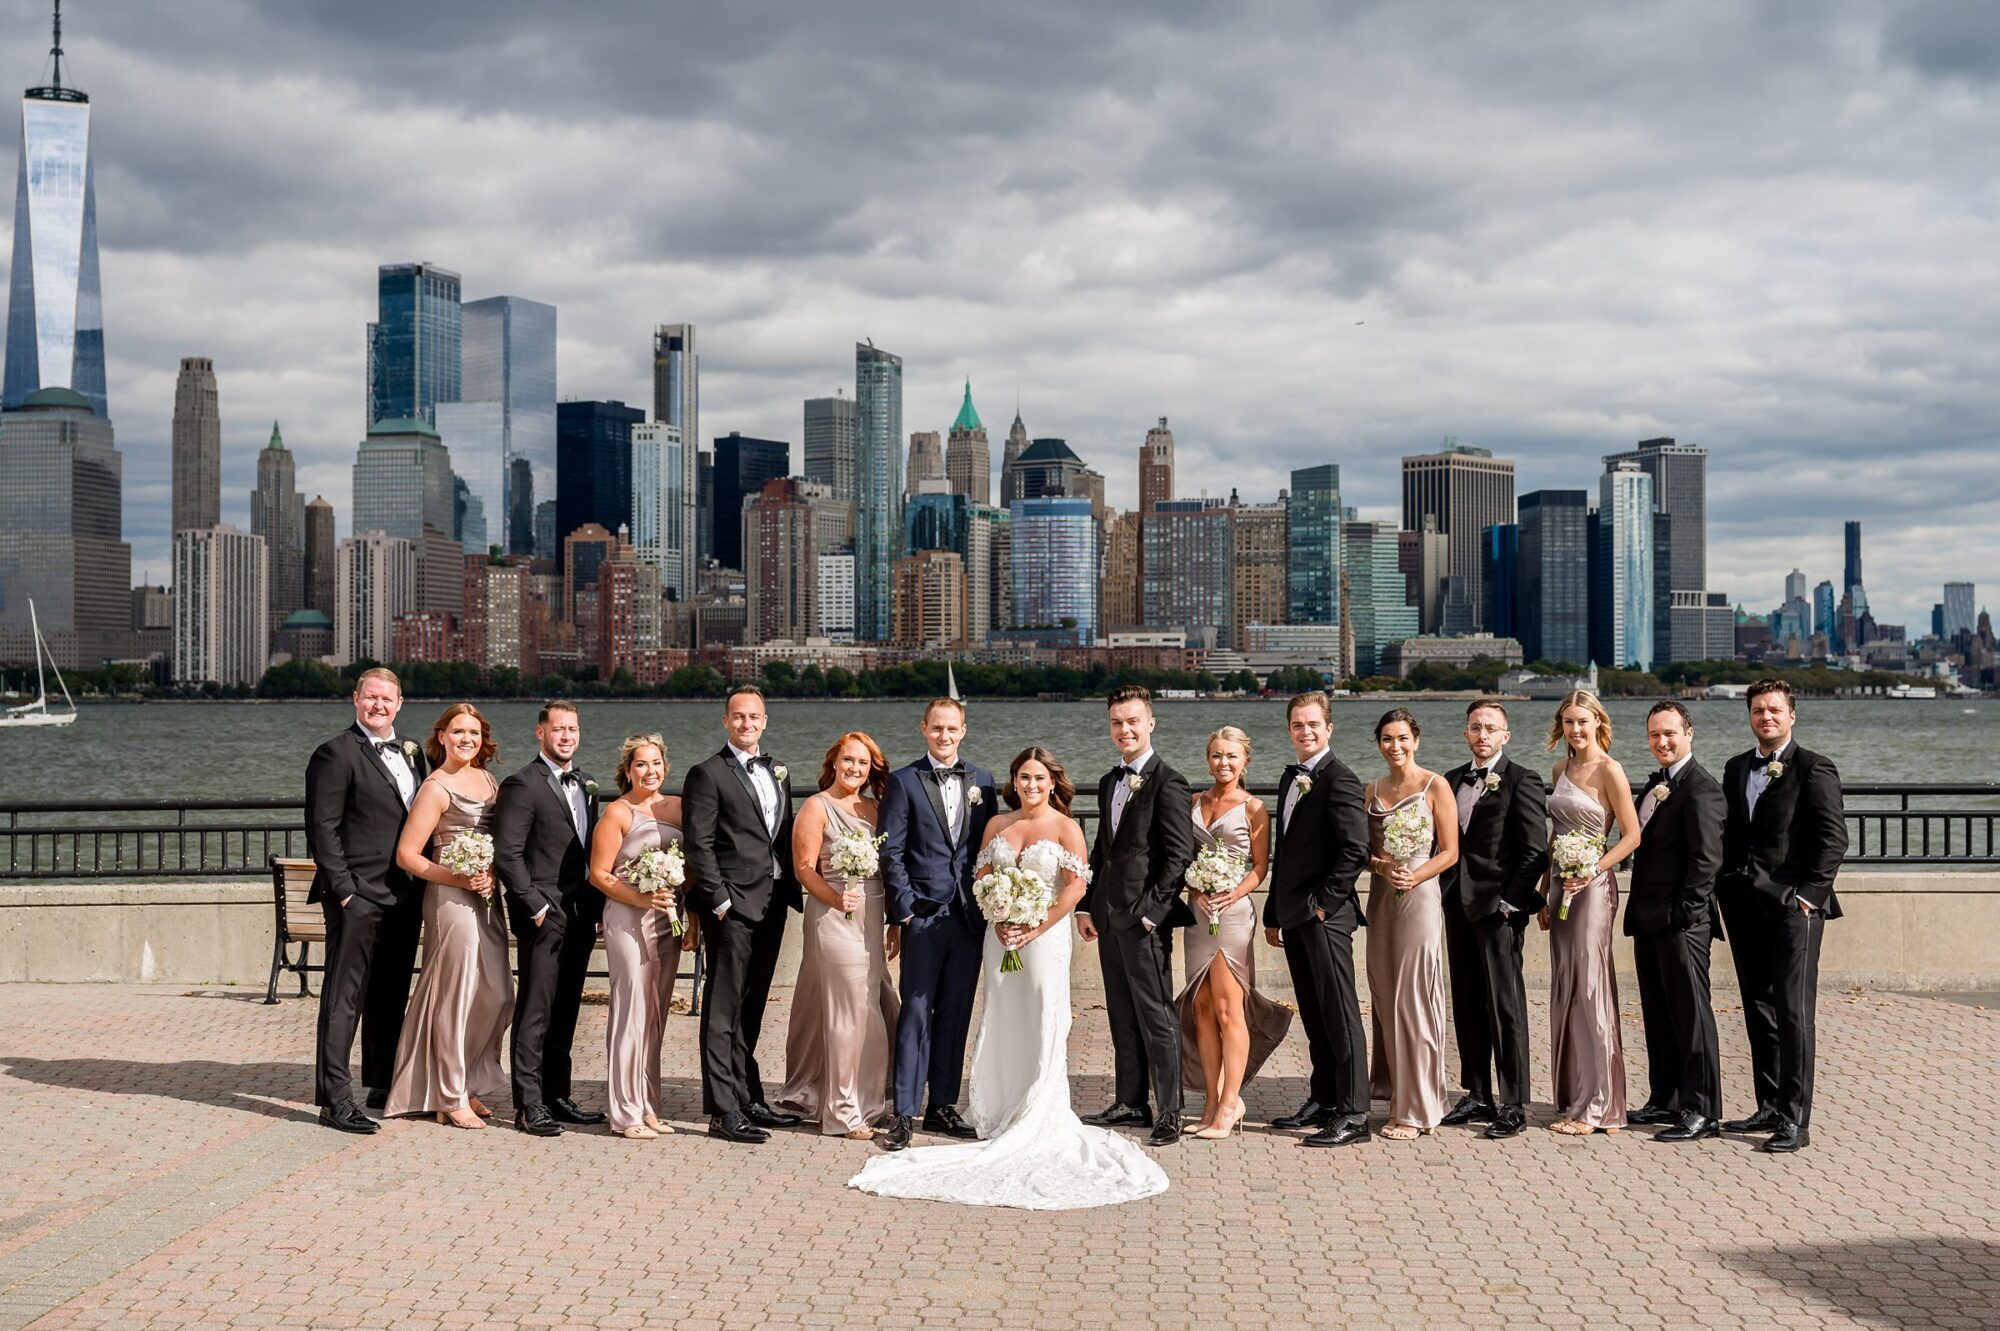 Wedding party posing in front of the manhattan skyline.